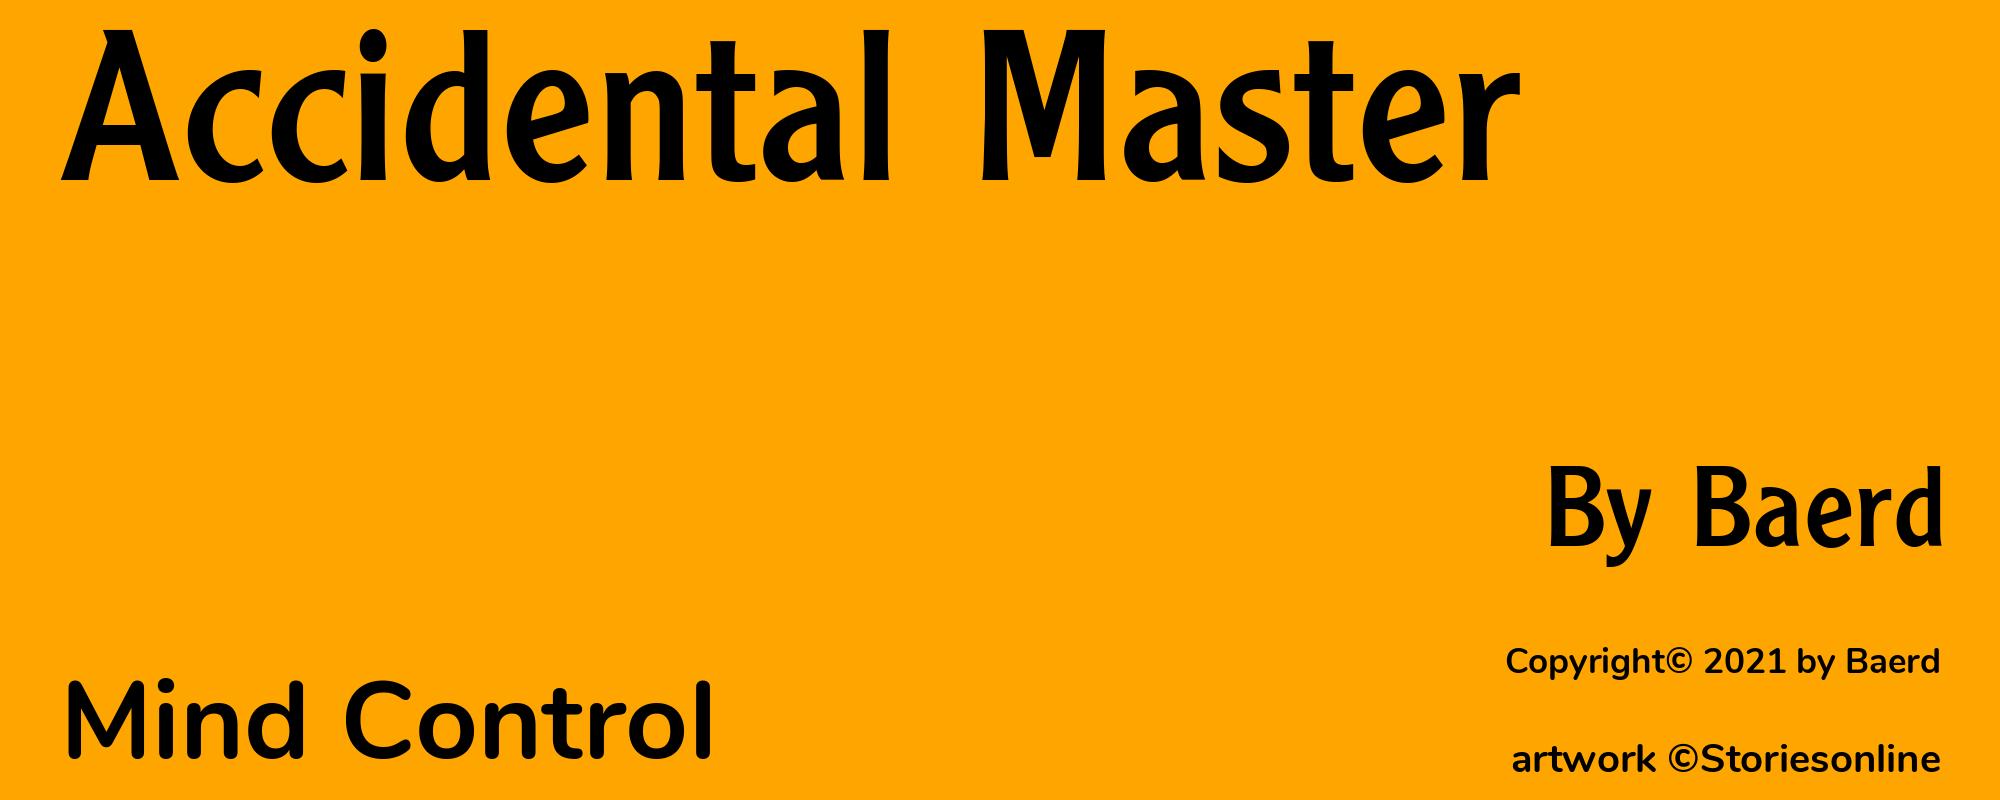 Accidental Master - Cover